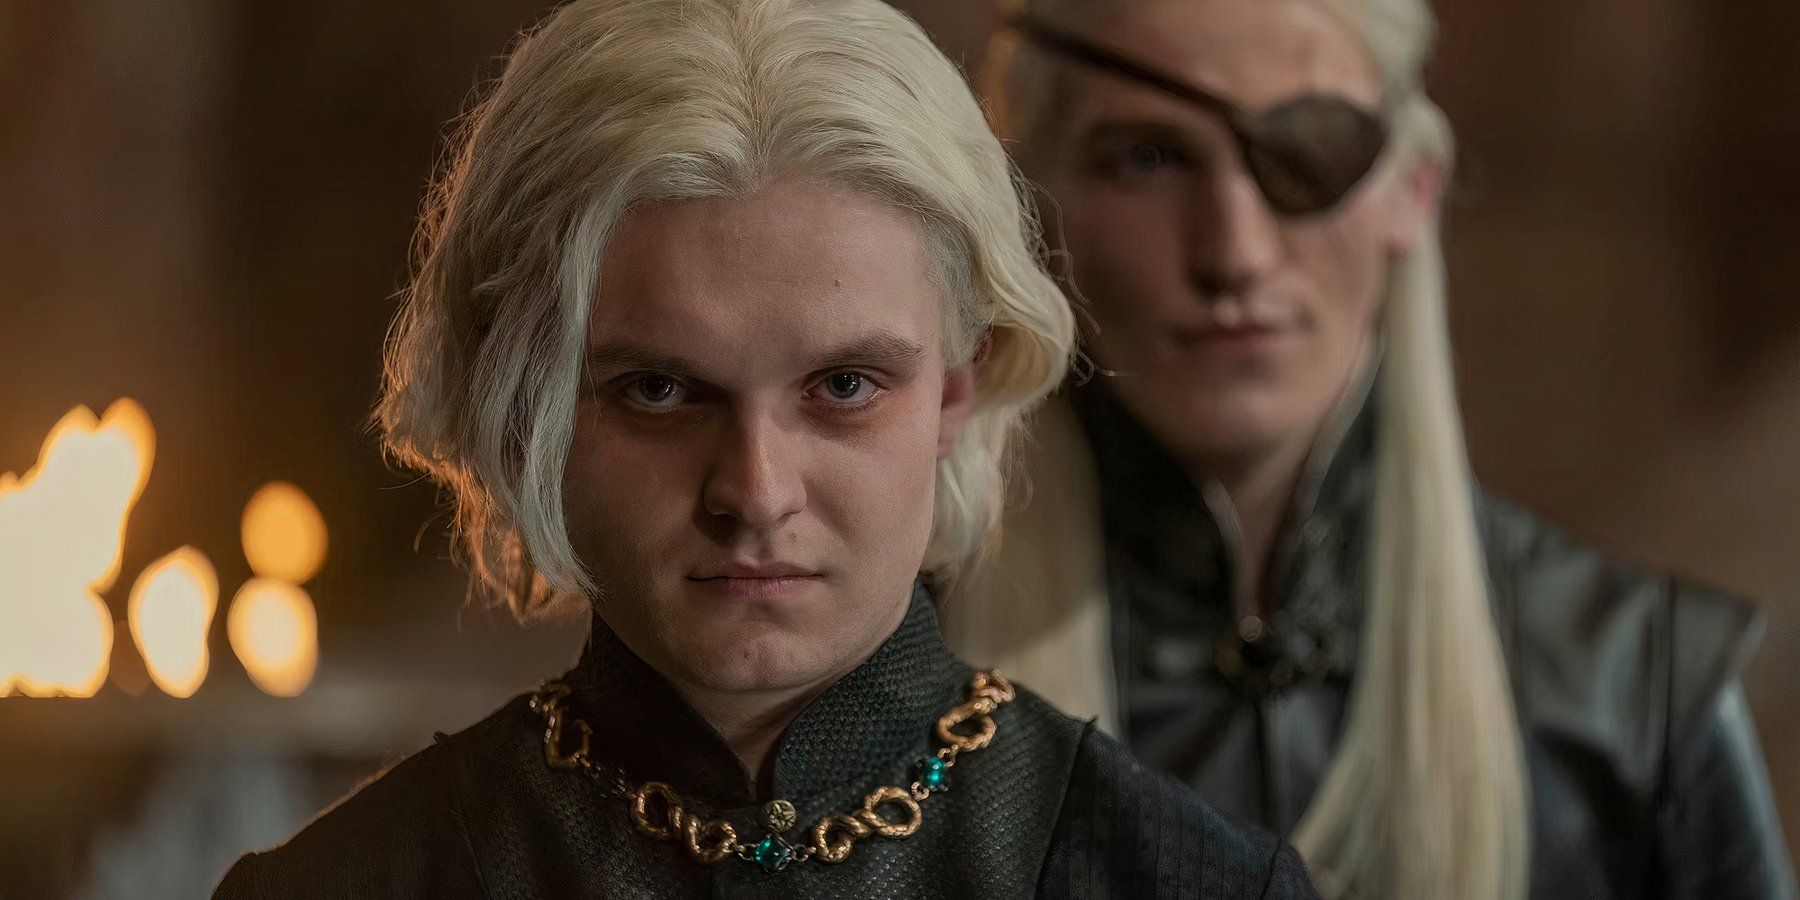 King Aegon Targaryen with his brother Aemond Targaryen who wears an eyepatch in House of the Dragon